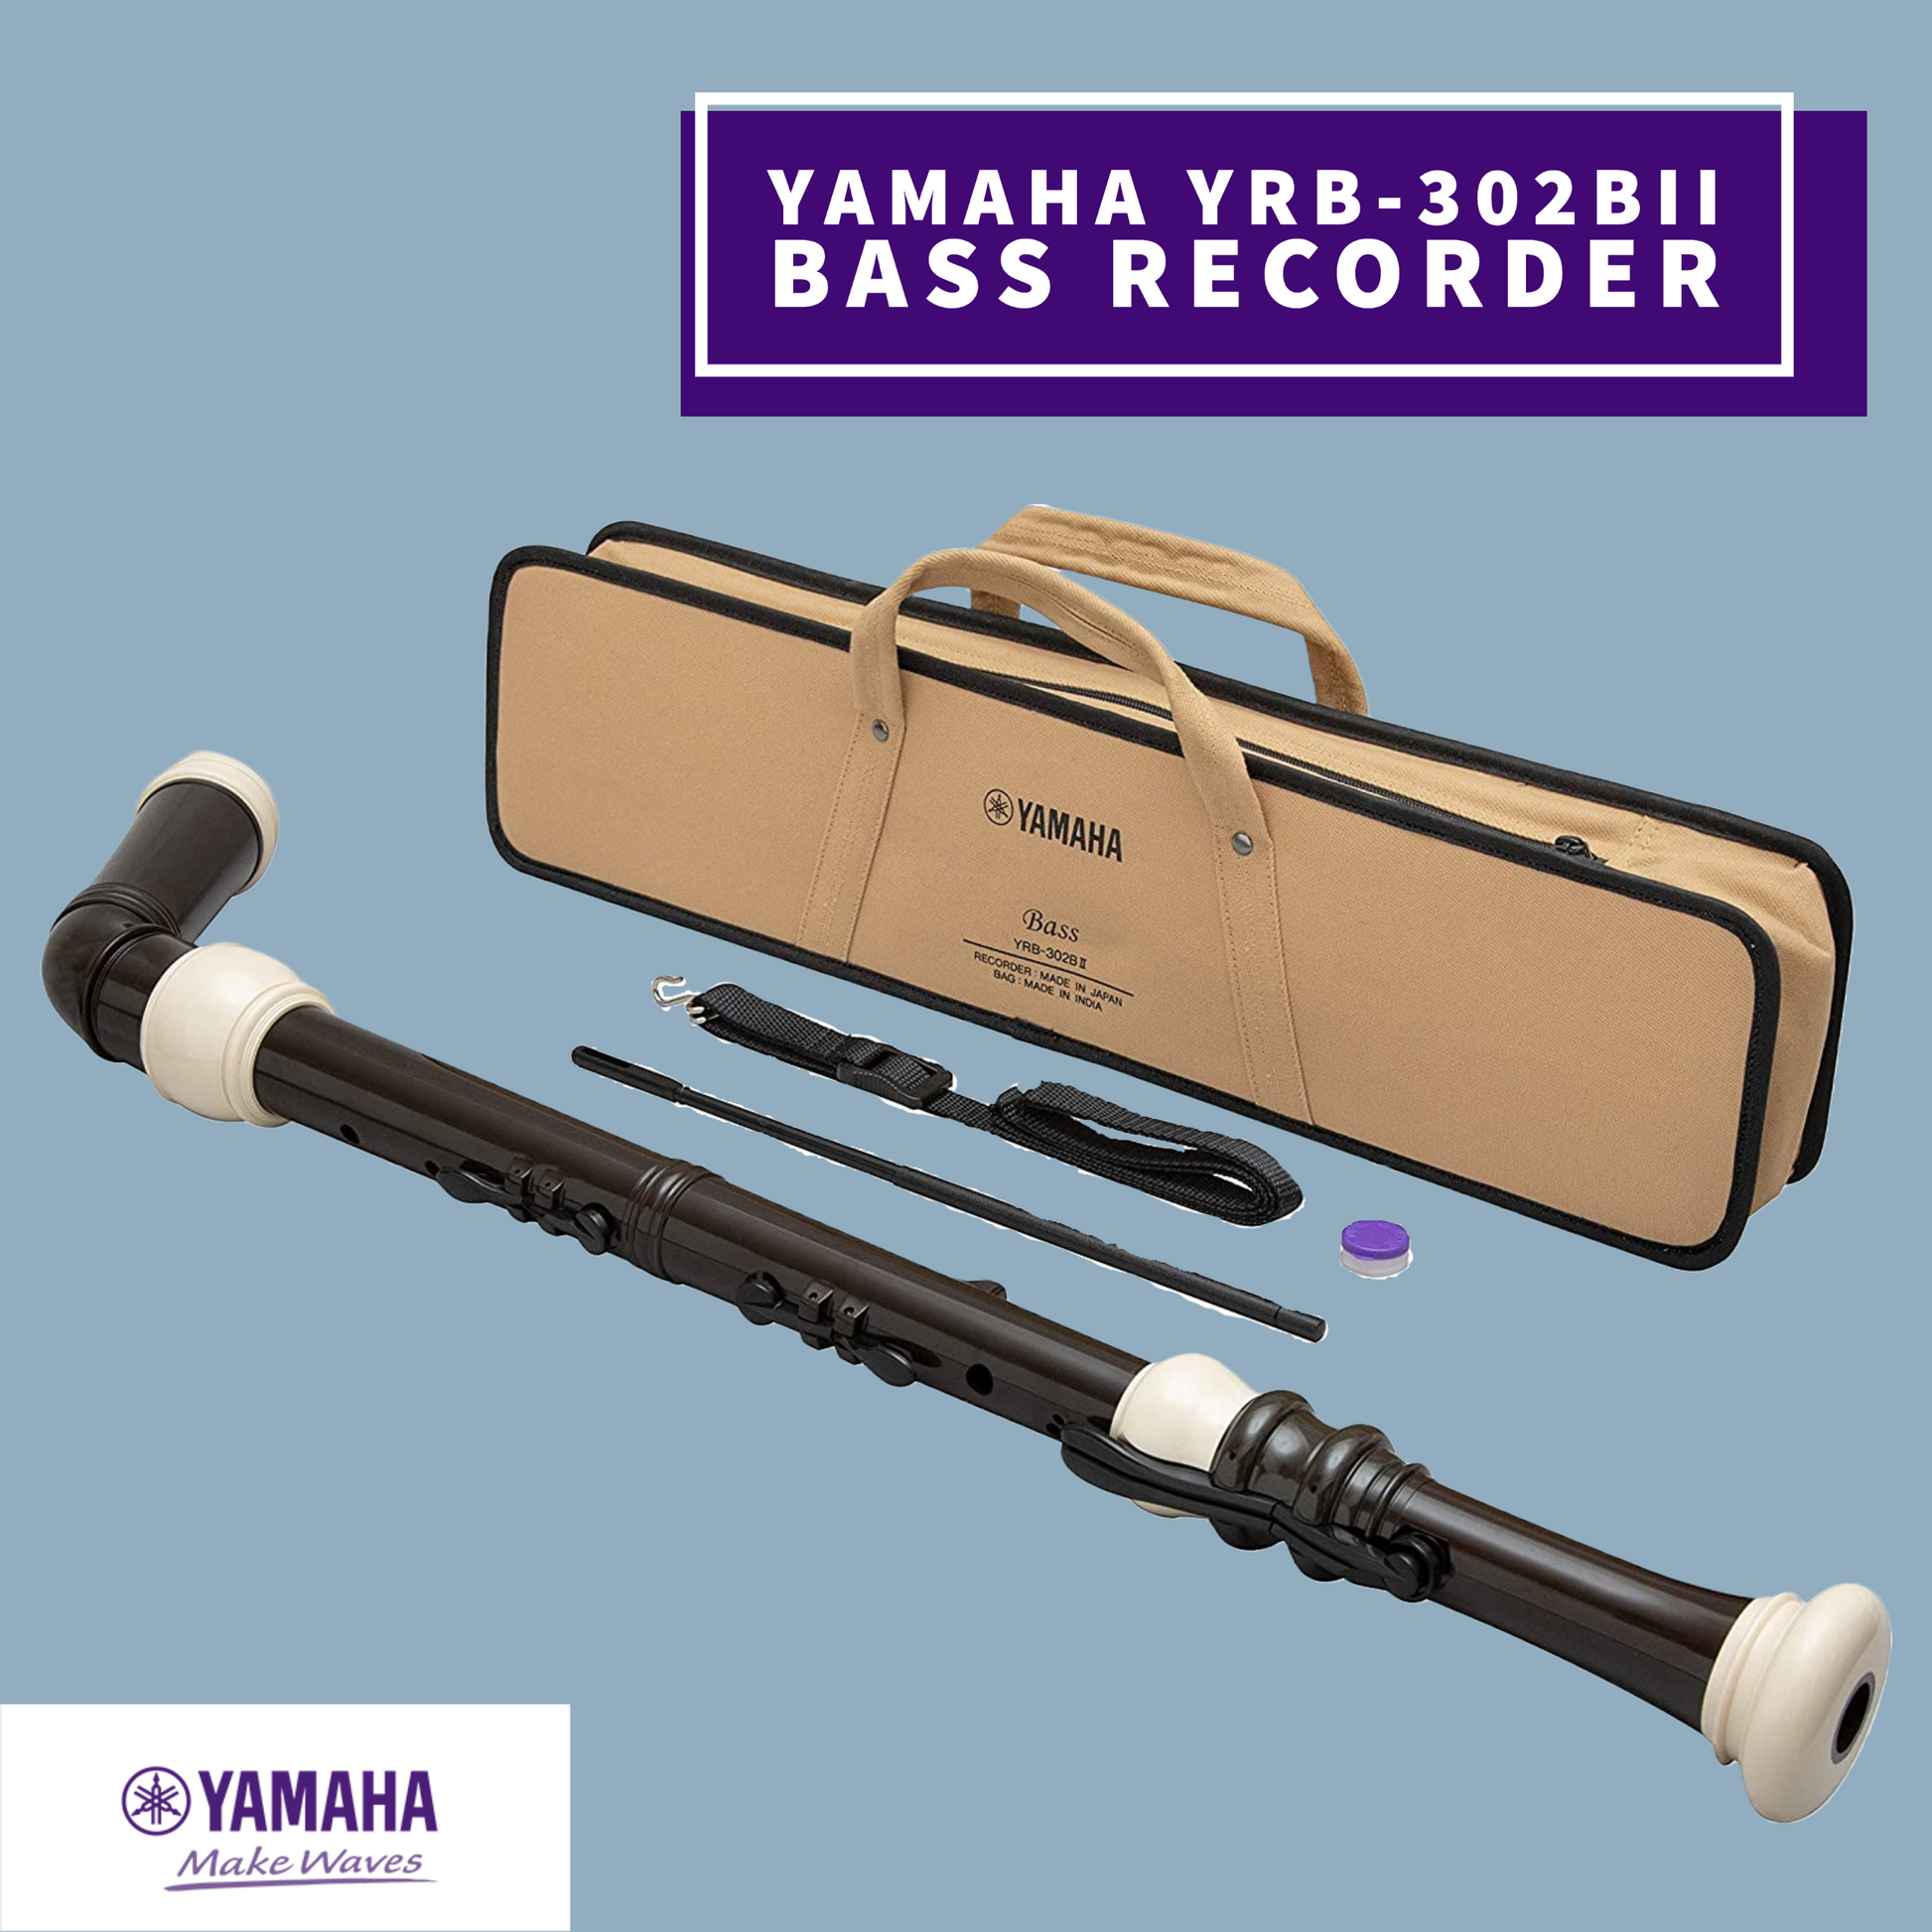 Yamaha Yrb-302Bii 4 Piece Abs Resin Bass Recorder (Key Of F) Musical Instruments & Accessories